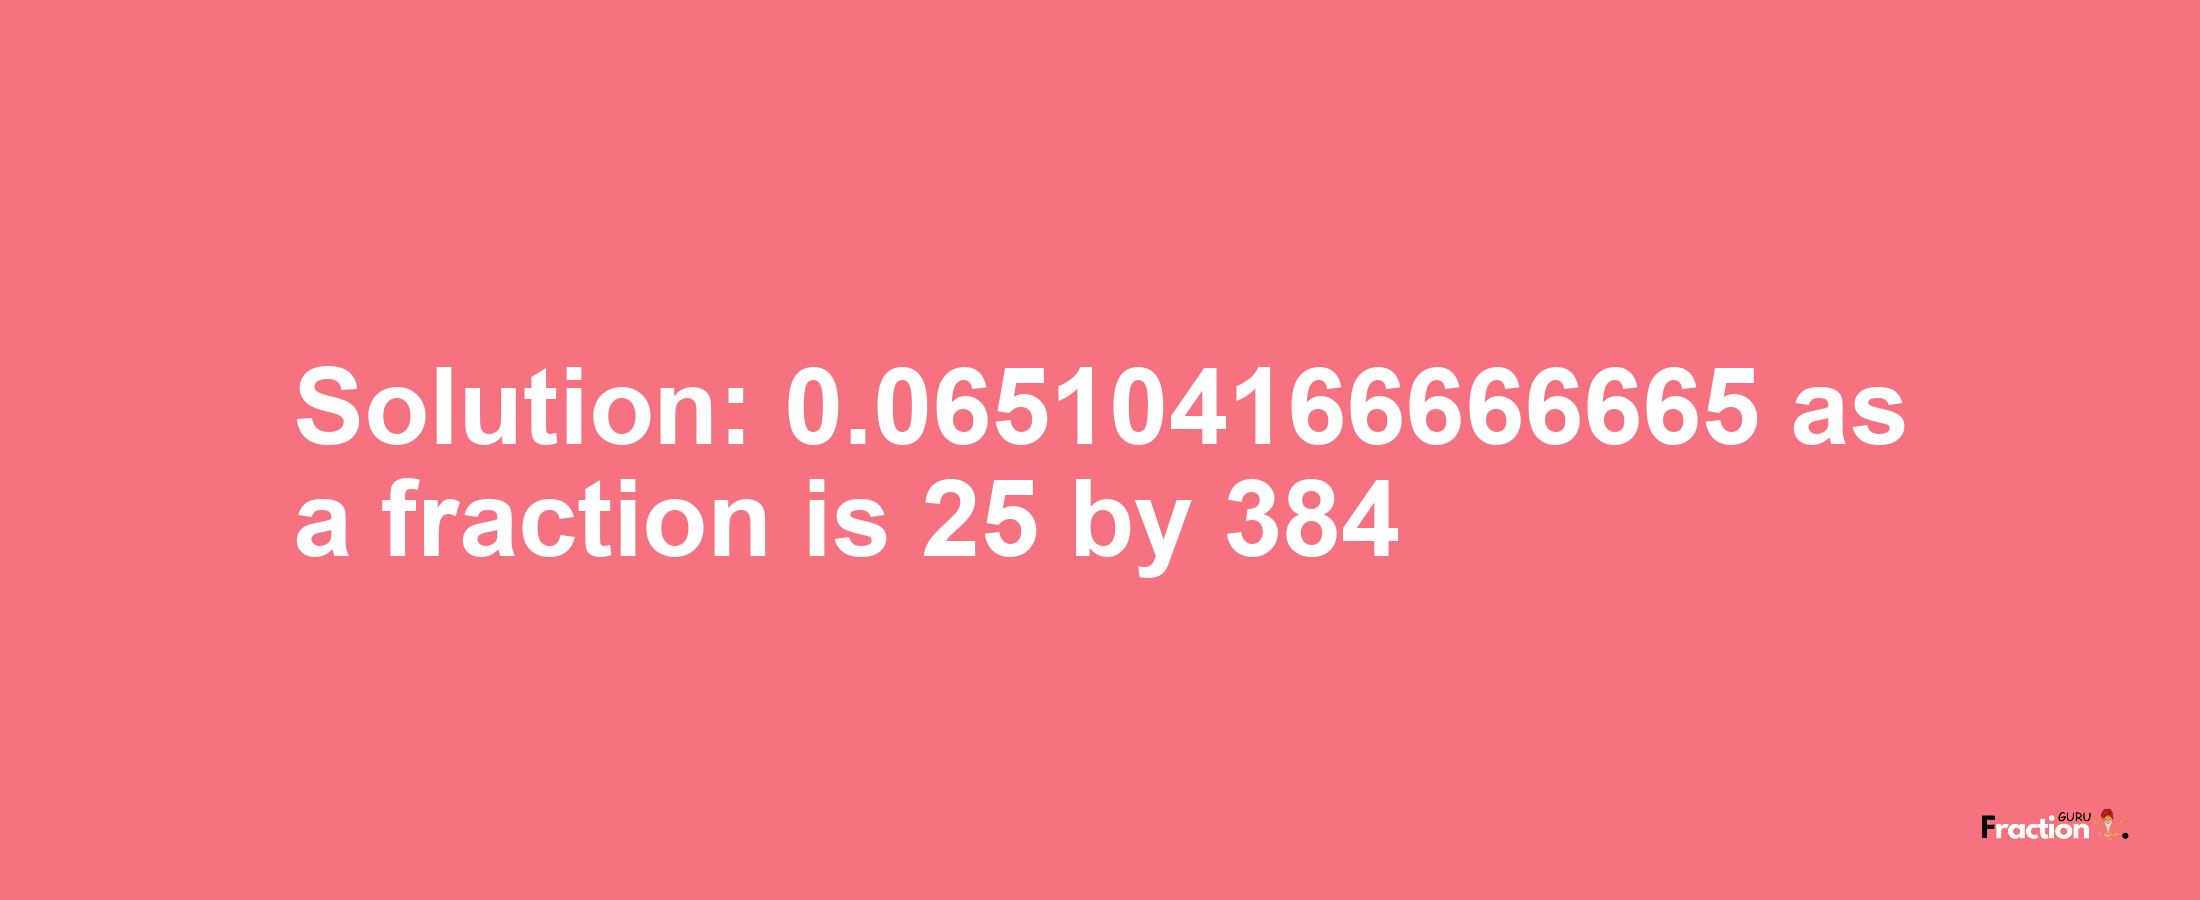 Solution:0.065104166666665 as a fraction is 25/384